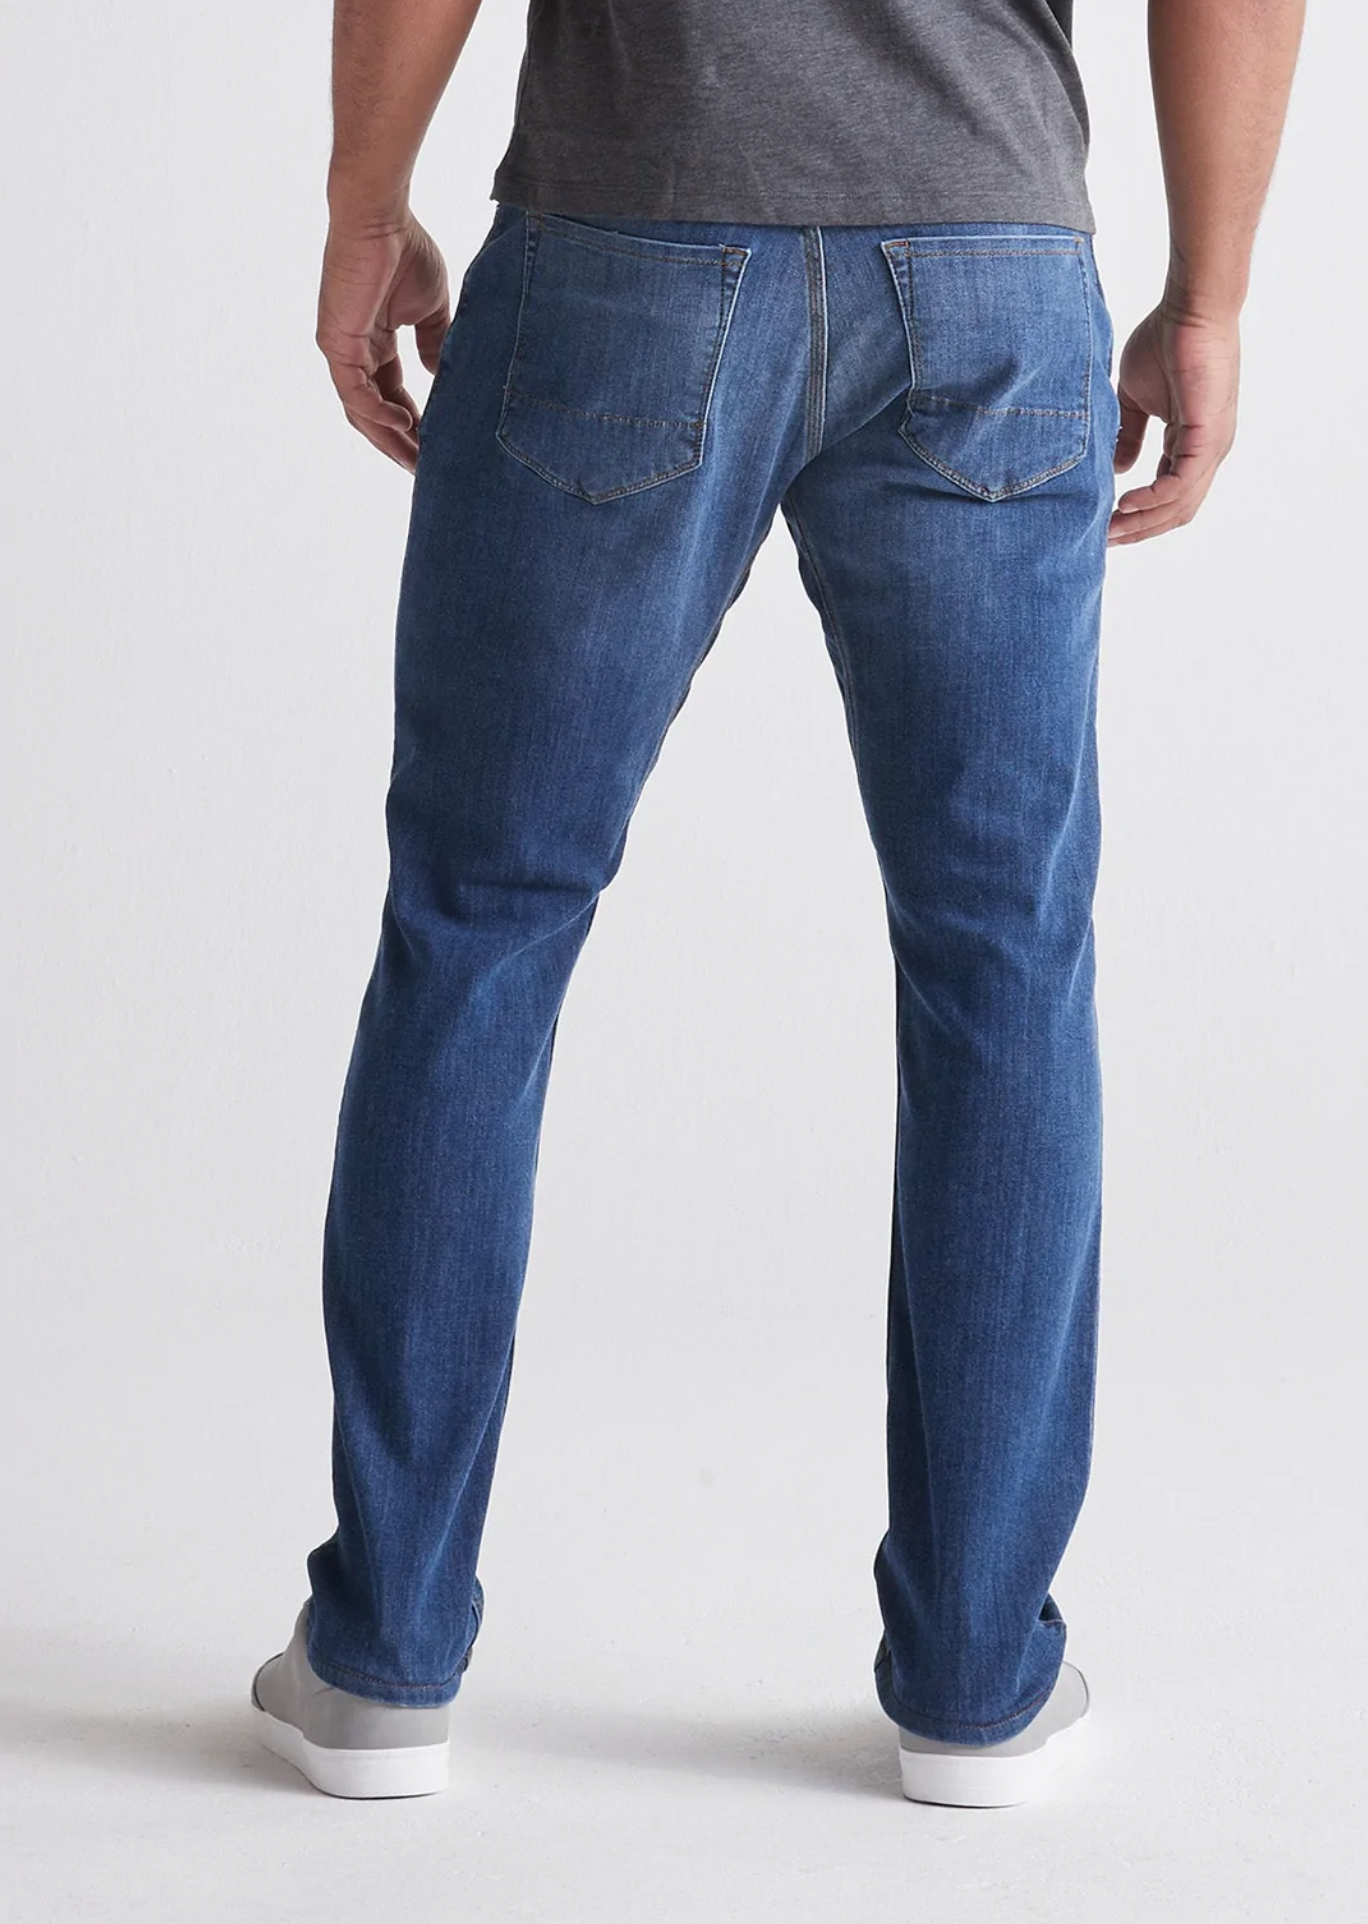 Performance Denim Relaxed Taper Ms